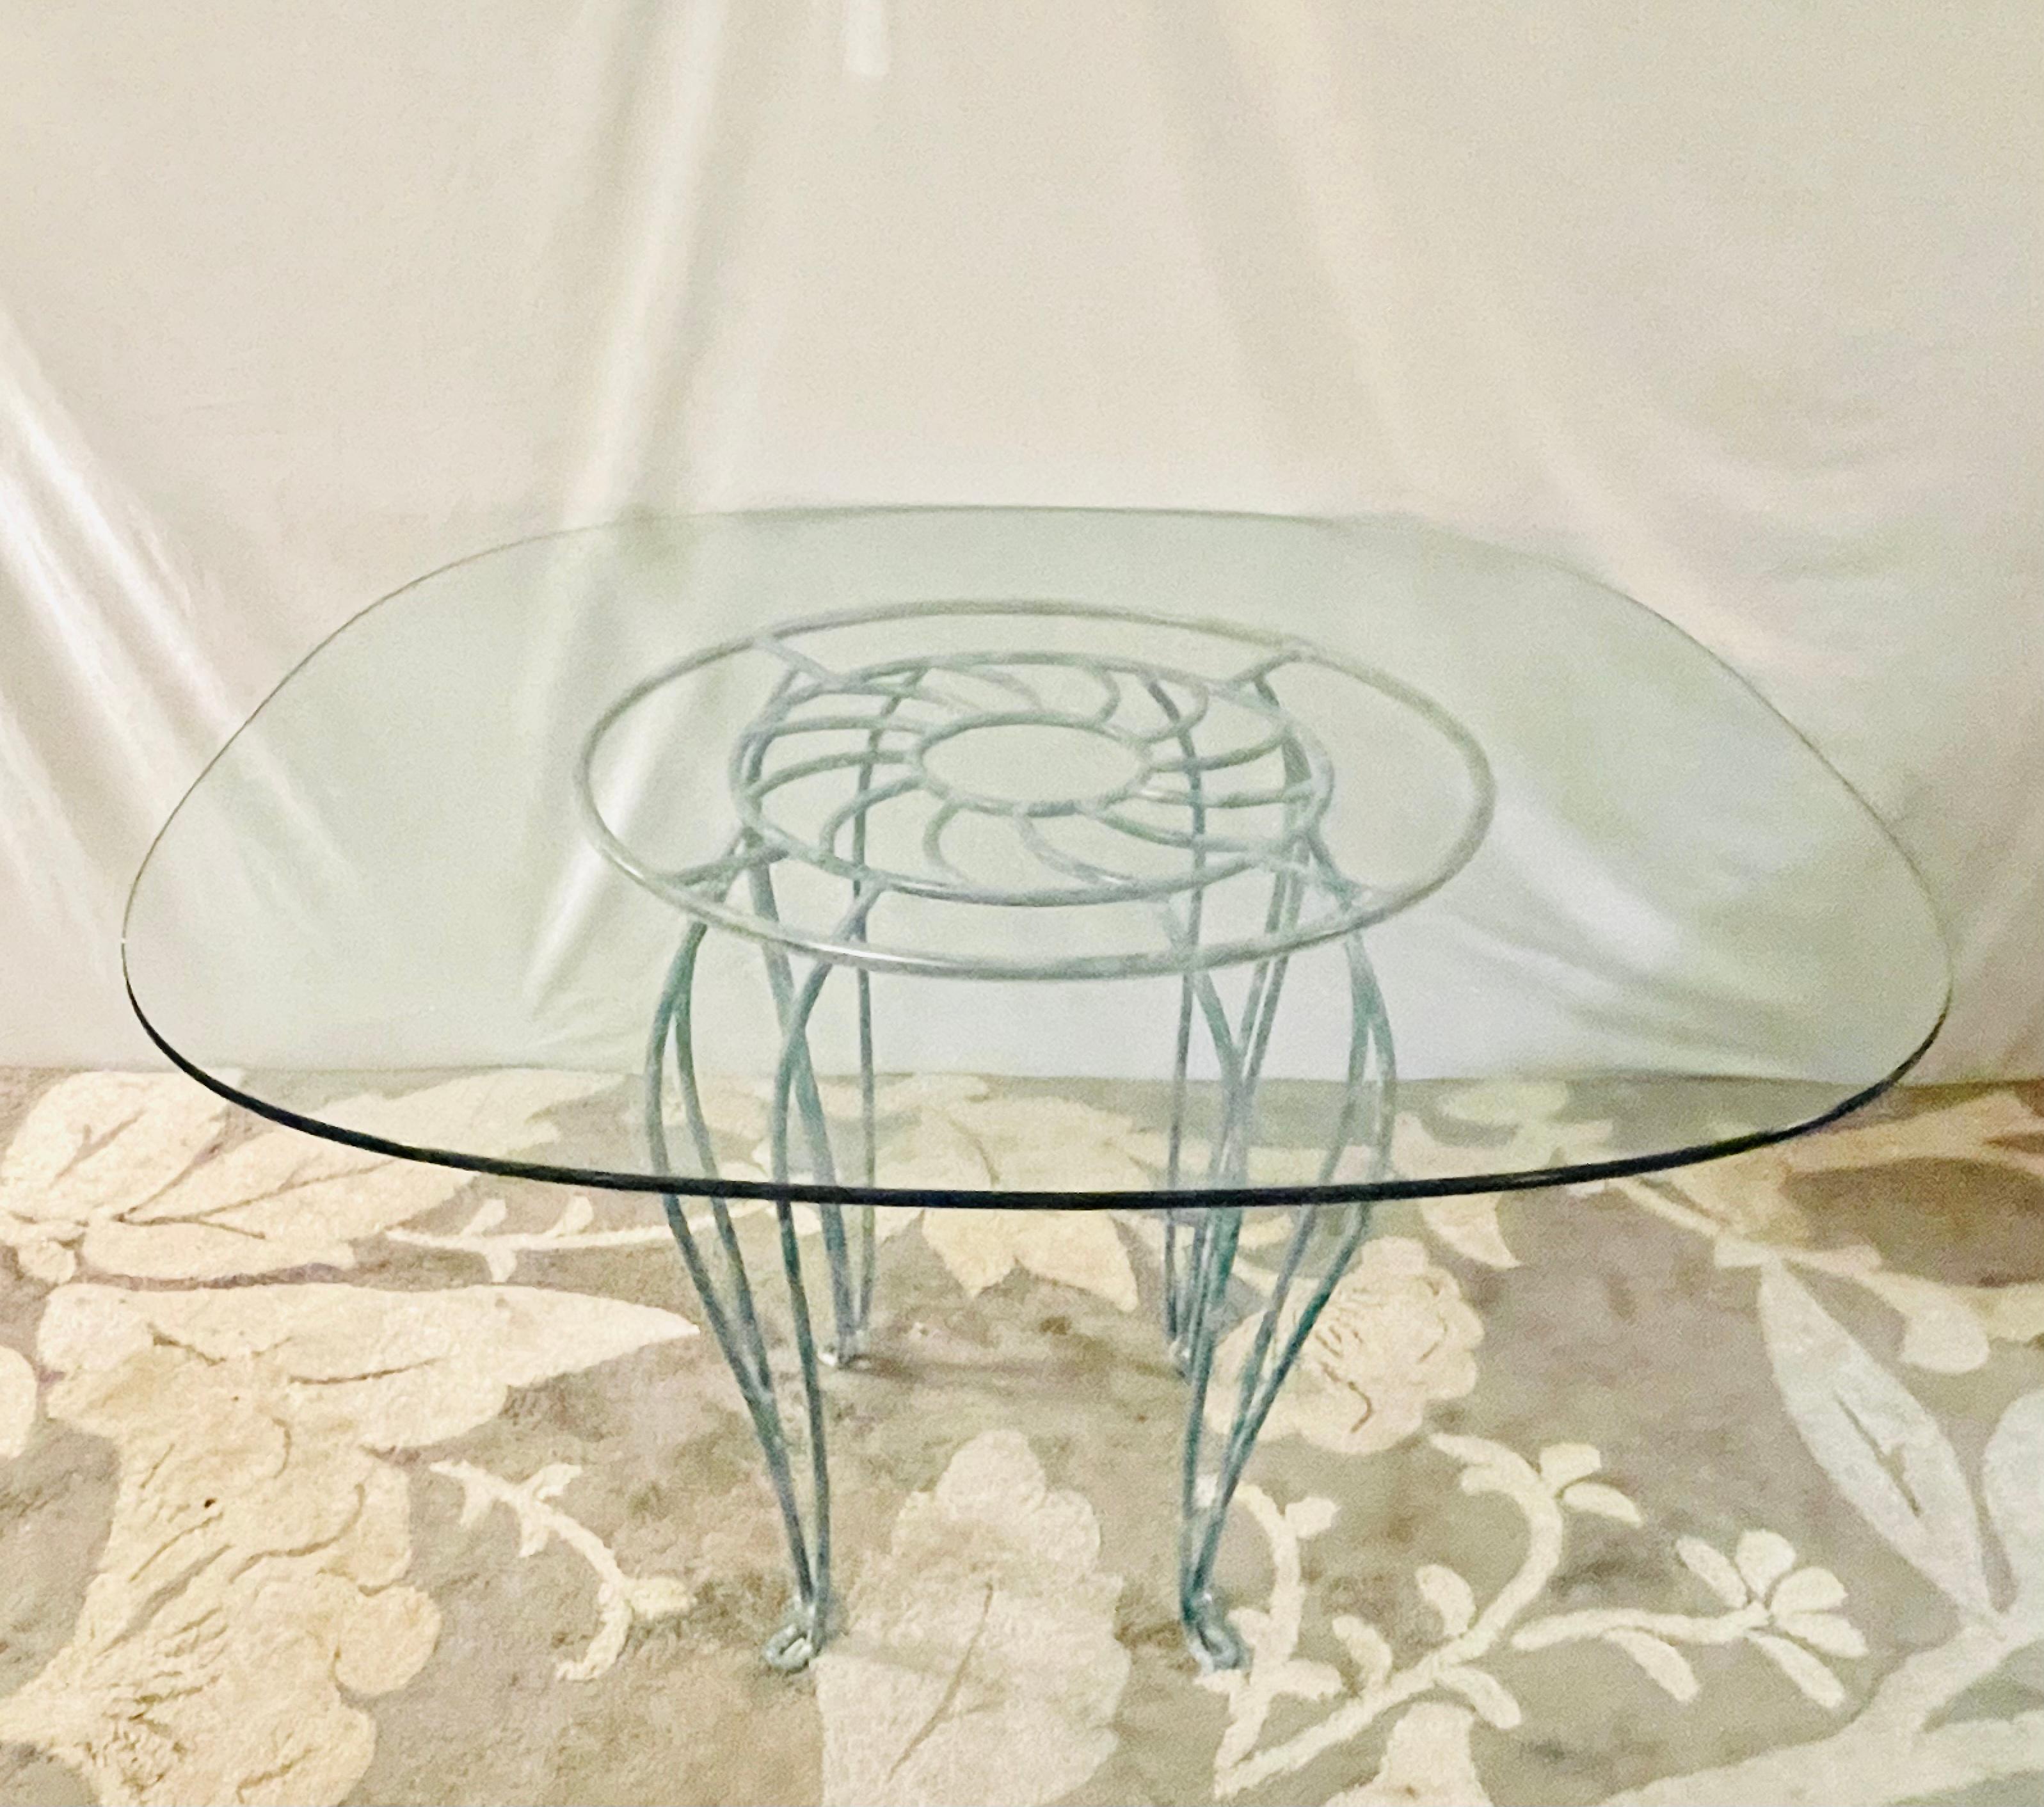 Coastal Wrought Iron Seashell Table In Good Condition For Sale In Cumberland, RI